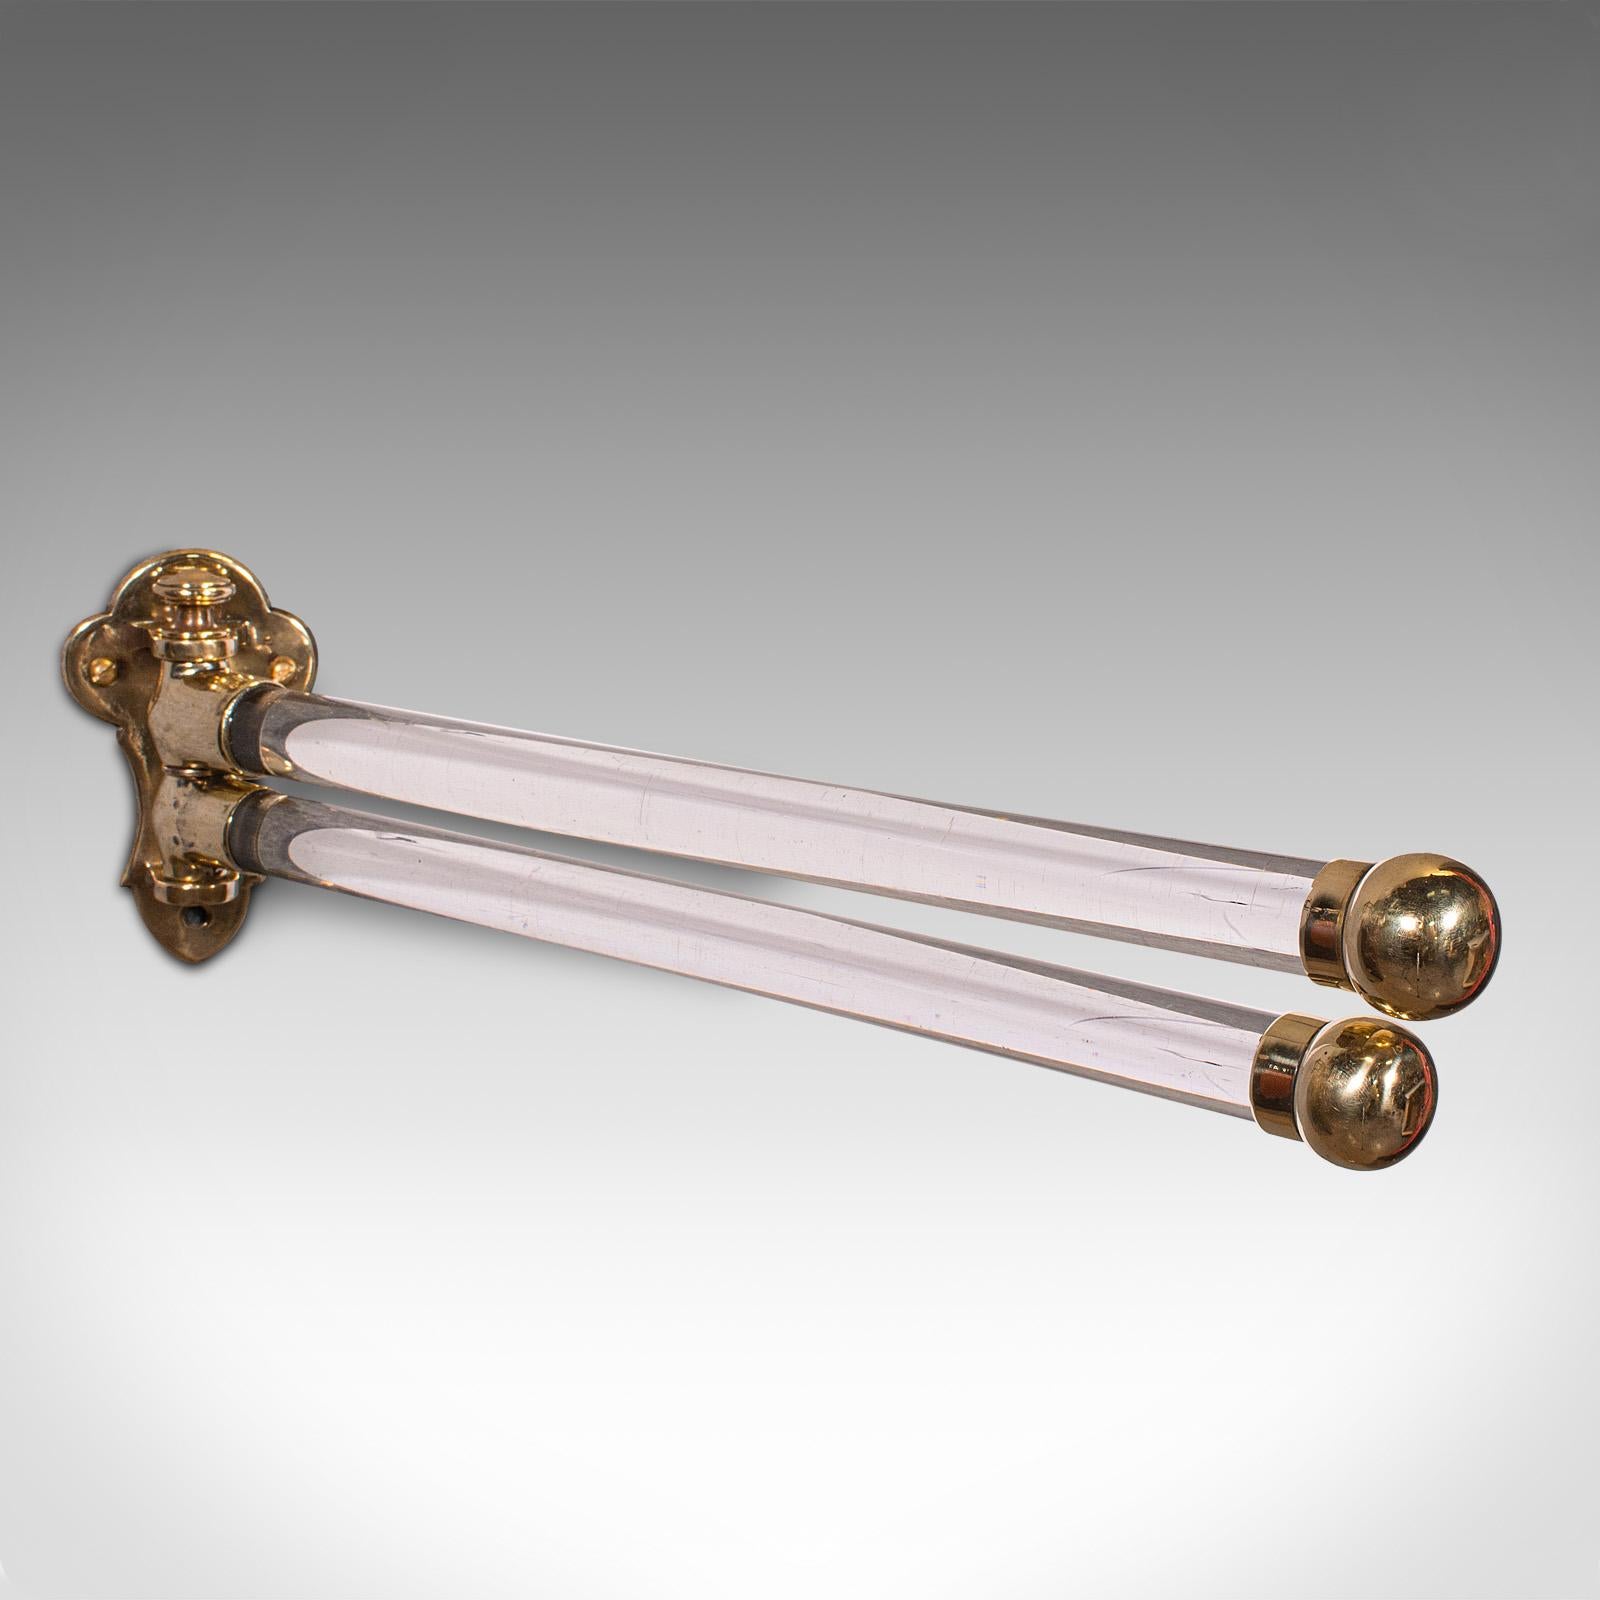 British Antique Mounted Towel Rail, English, Brass, Glass, Scarf Rack, Victorian, C.1850 For Sale